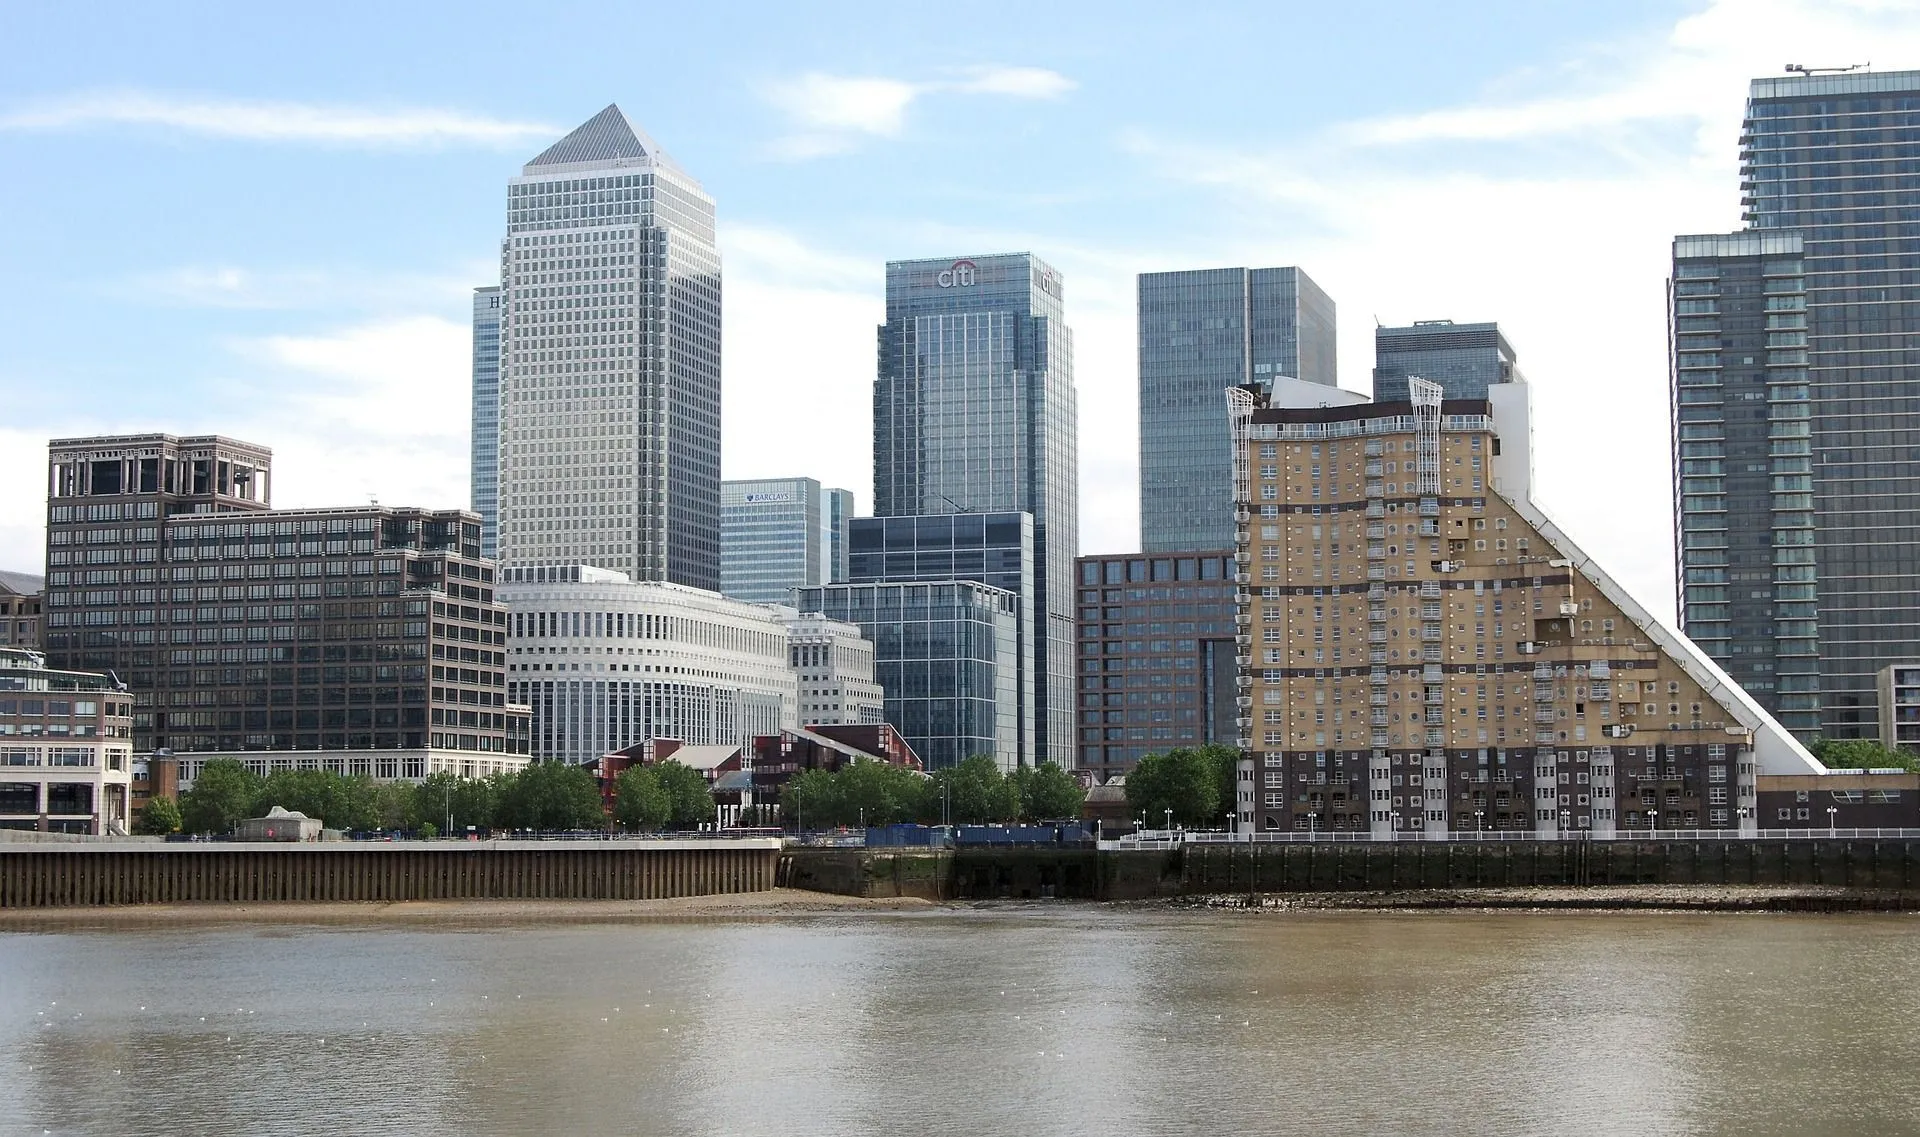 More than 100 events are held at Canary Wharf on an annual basis!